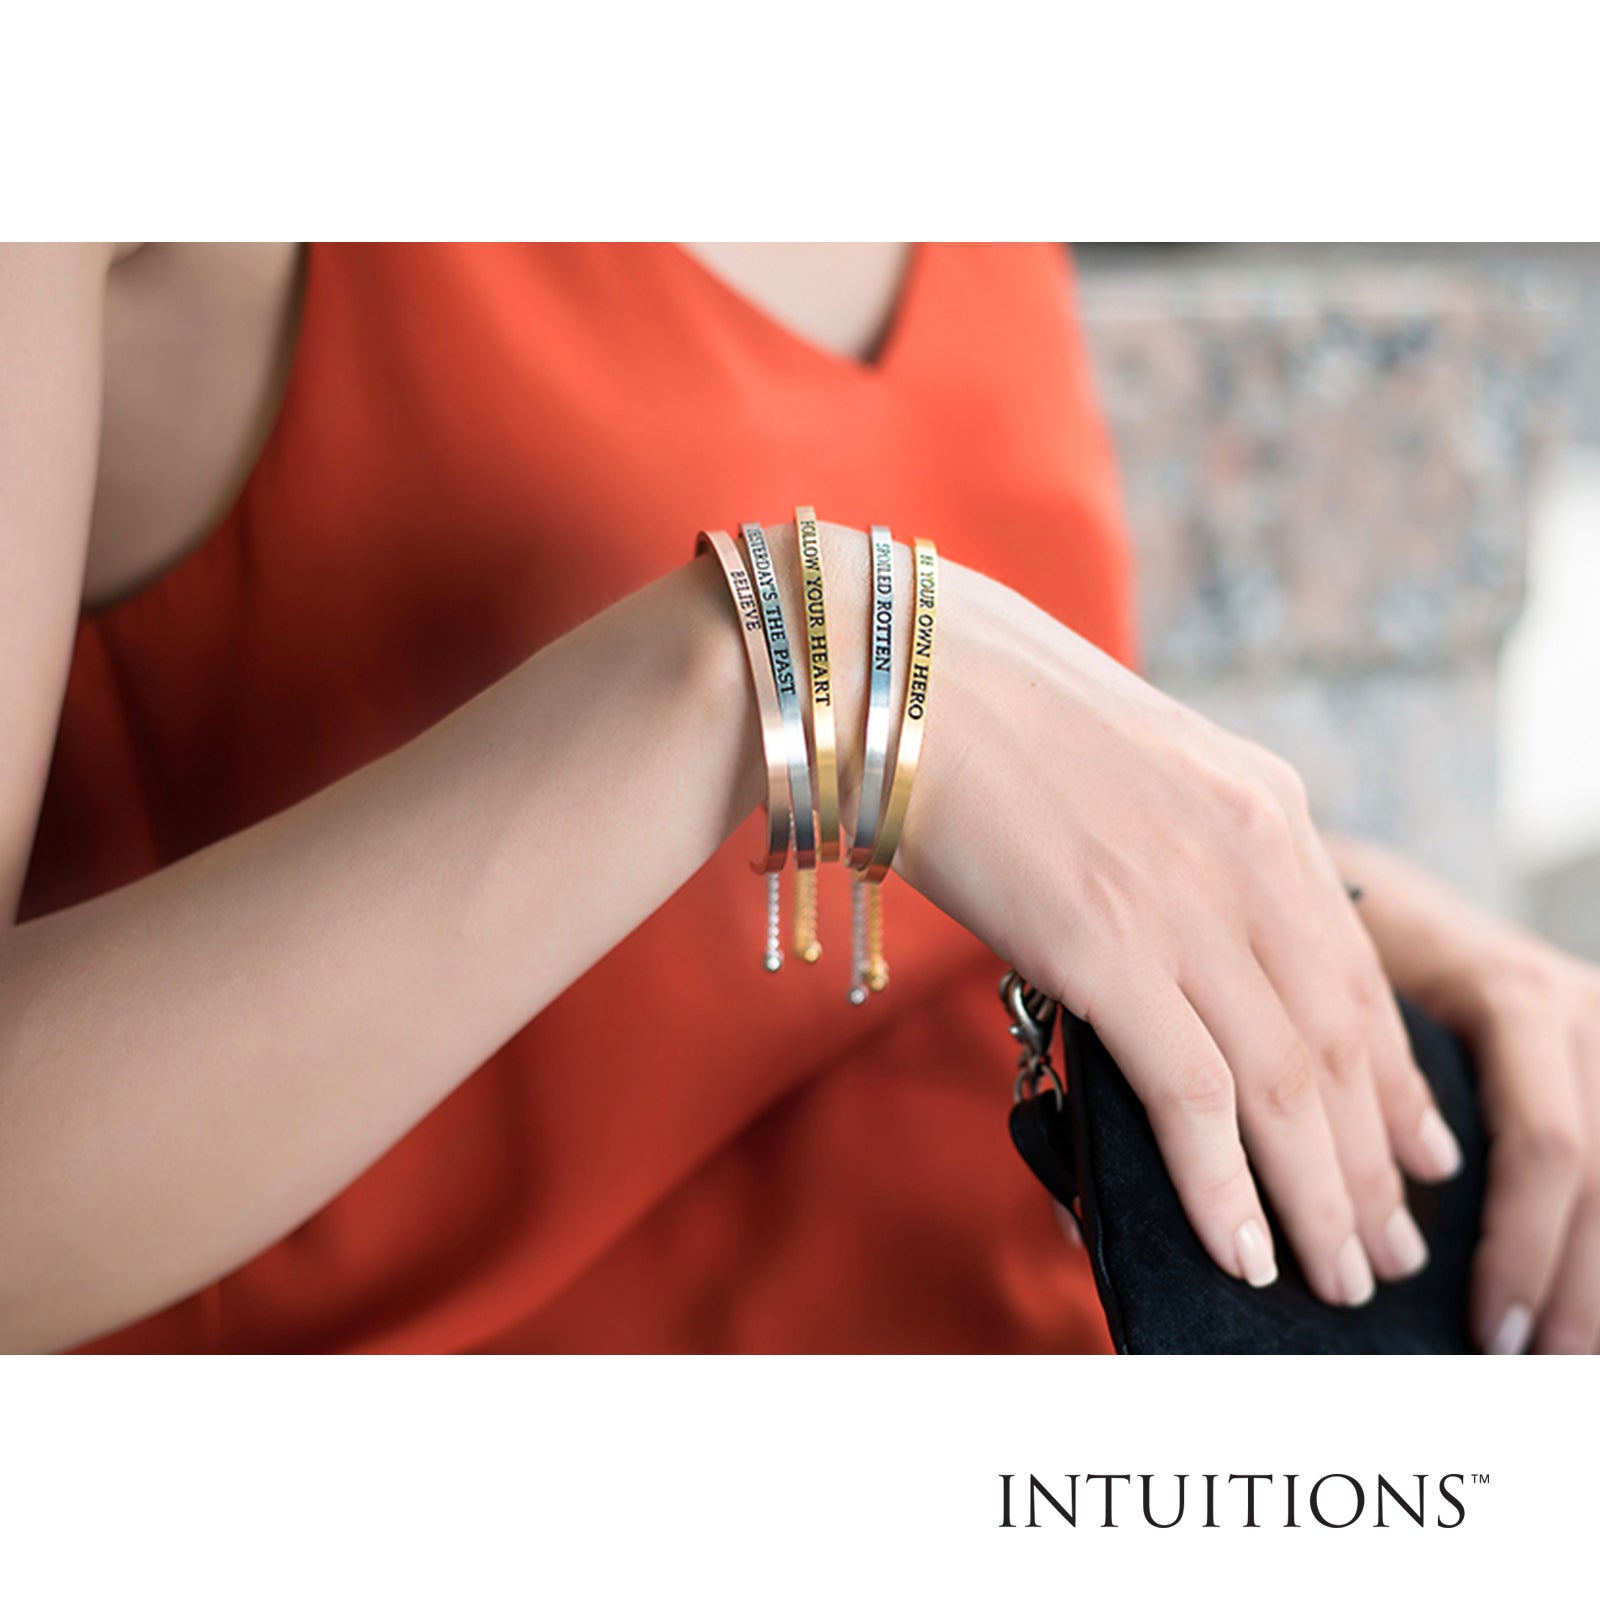 Intuitions Stainless Steel EMBRACE THE MOMENT Diamond Accent Adjustable Bracelet fine designer jewelry for men and women